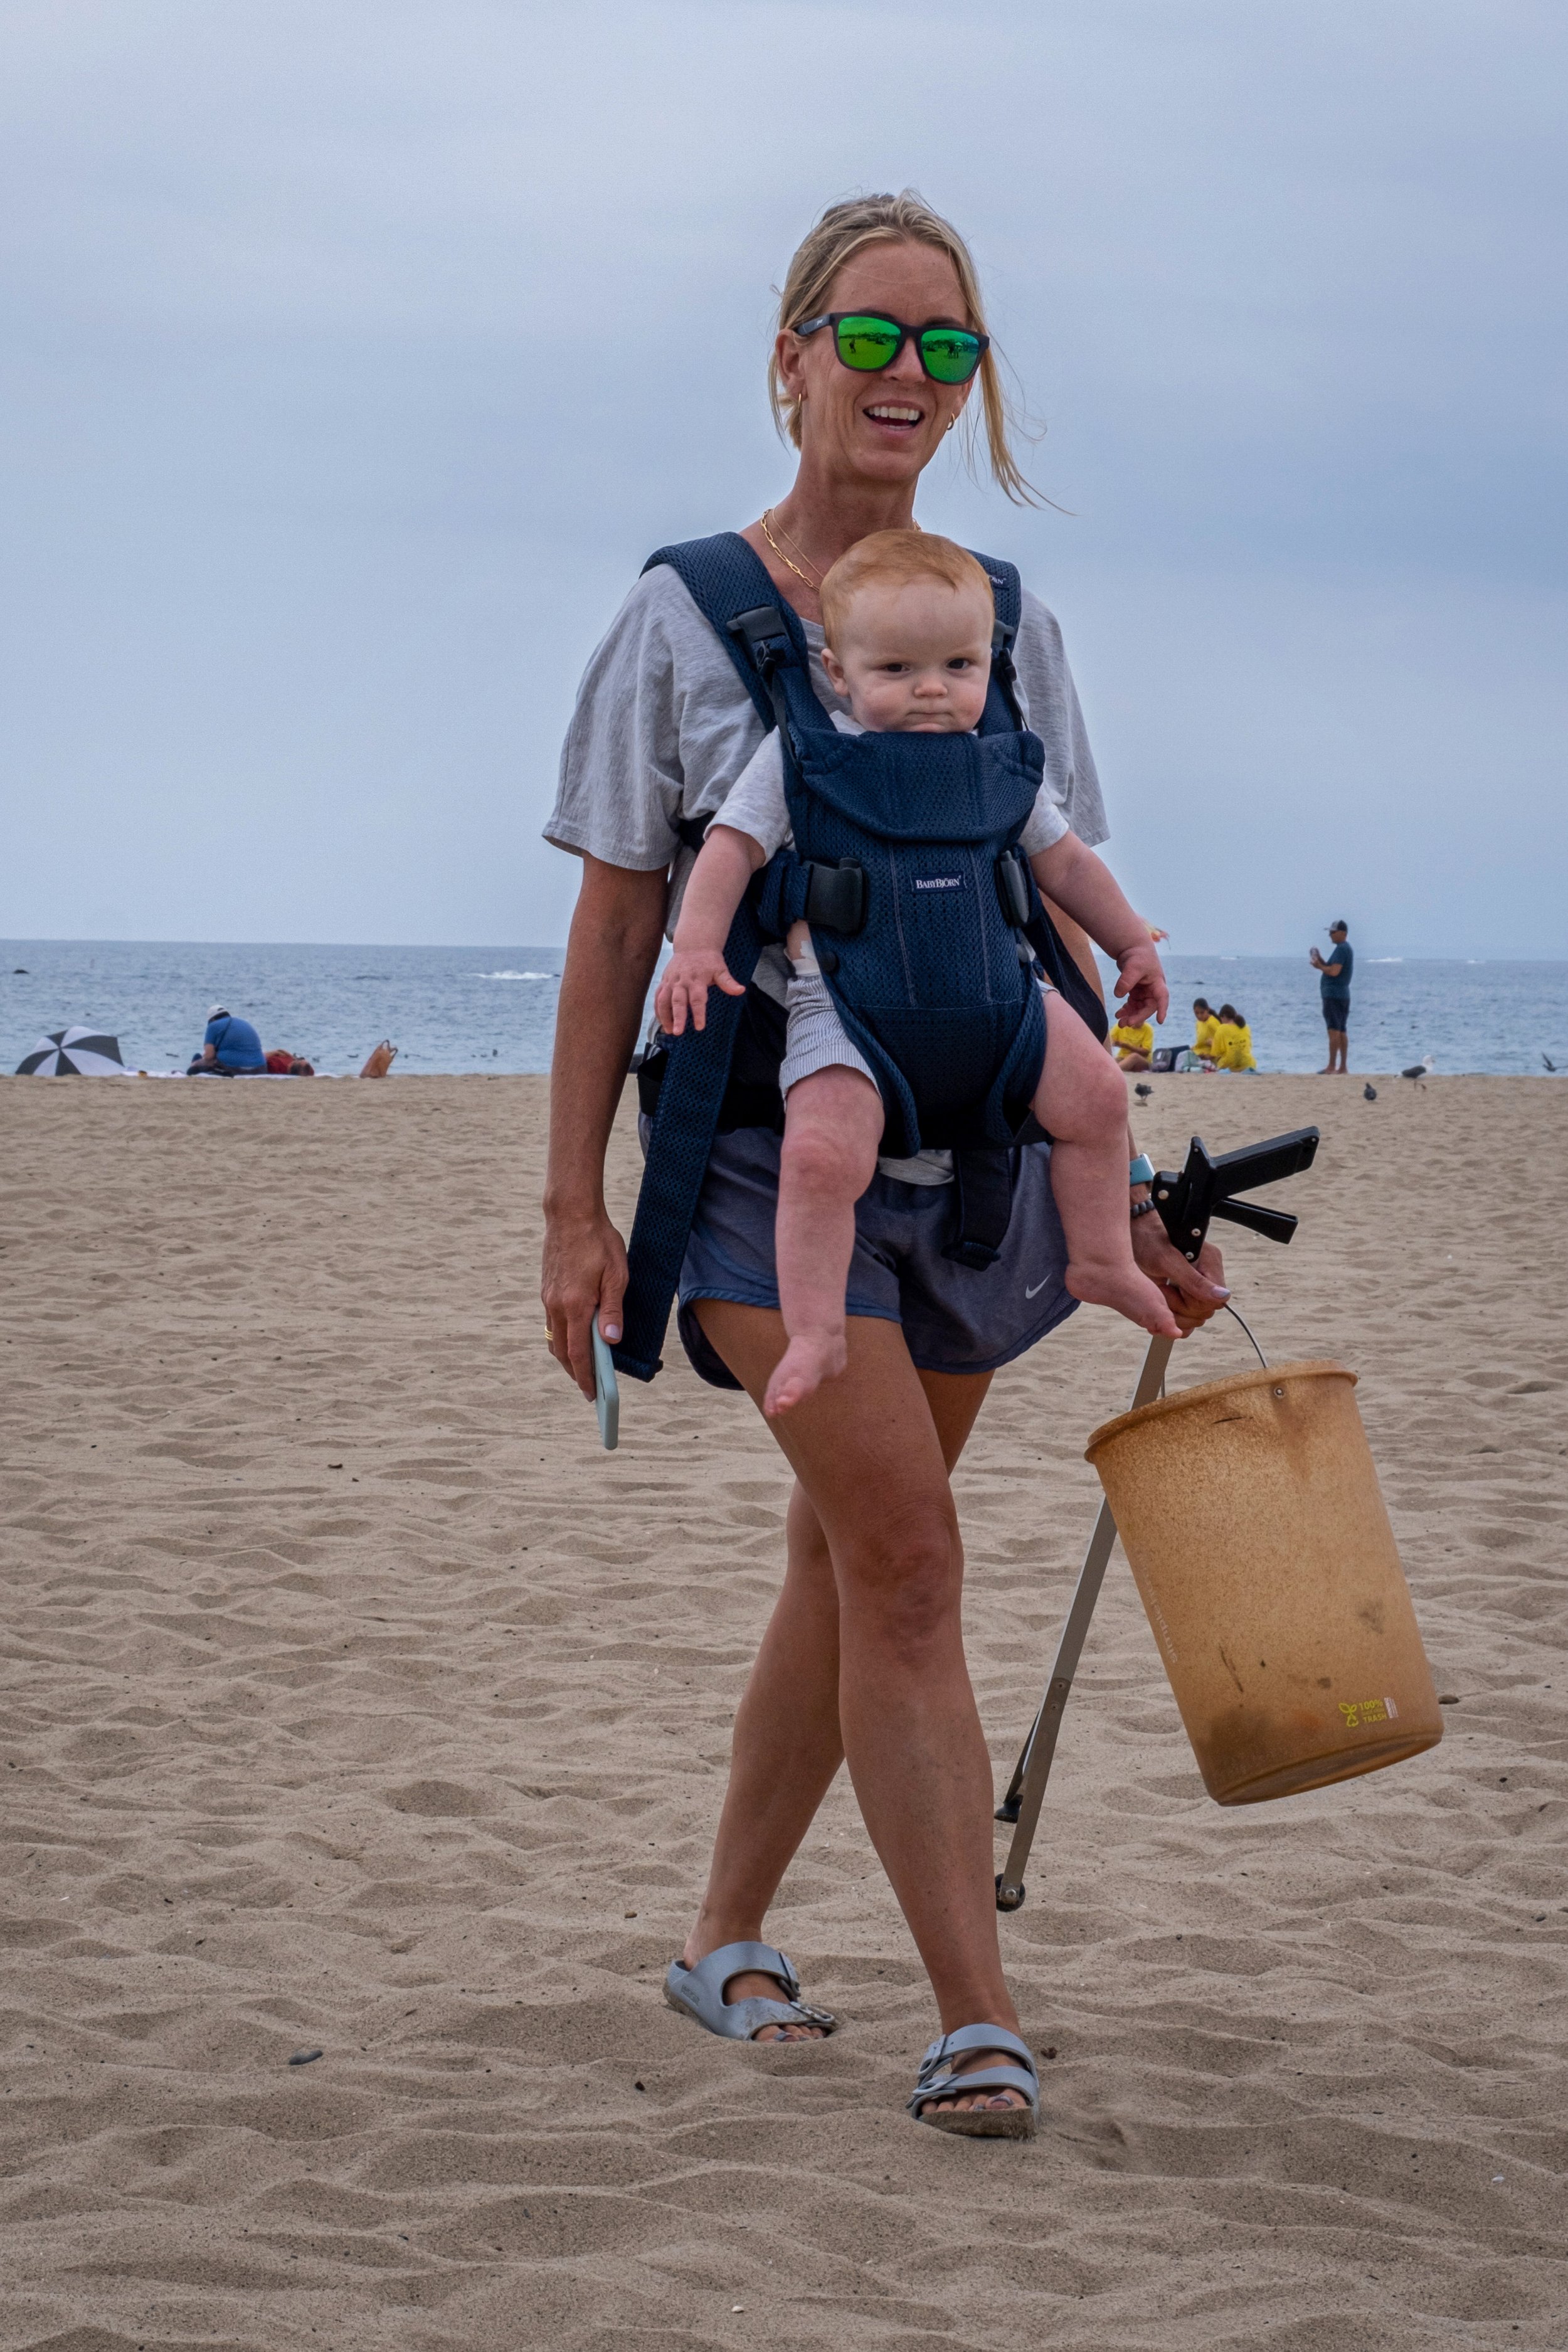  Allison Kitchen and her son, Brooklyn, found a lot of cigarette butts and bottle caps, “It’s nice to clean up our beaches since we use them so much,” Kitchen said. Heal The Bay Coastal Cleanup Day in Santa Monica Calif. on Saturday, September 17, 20